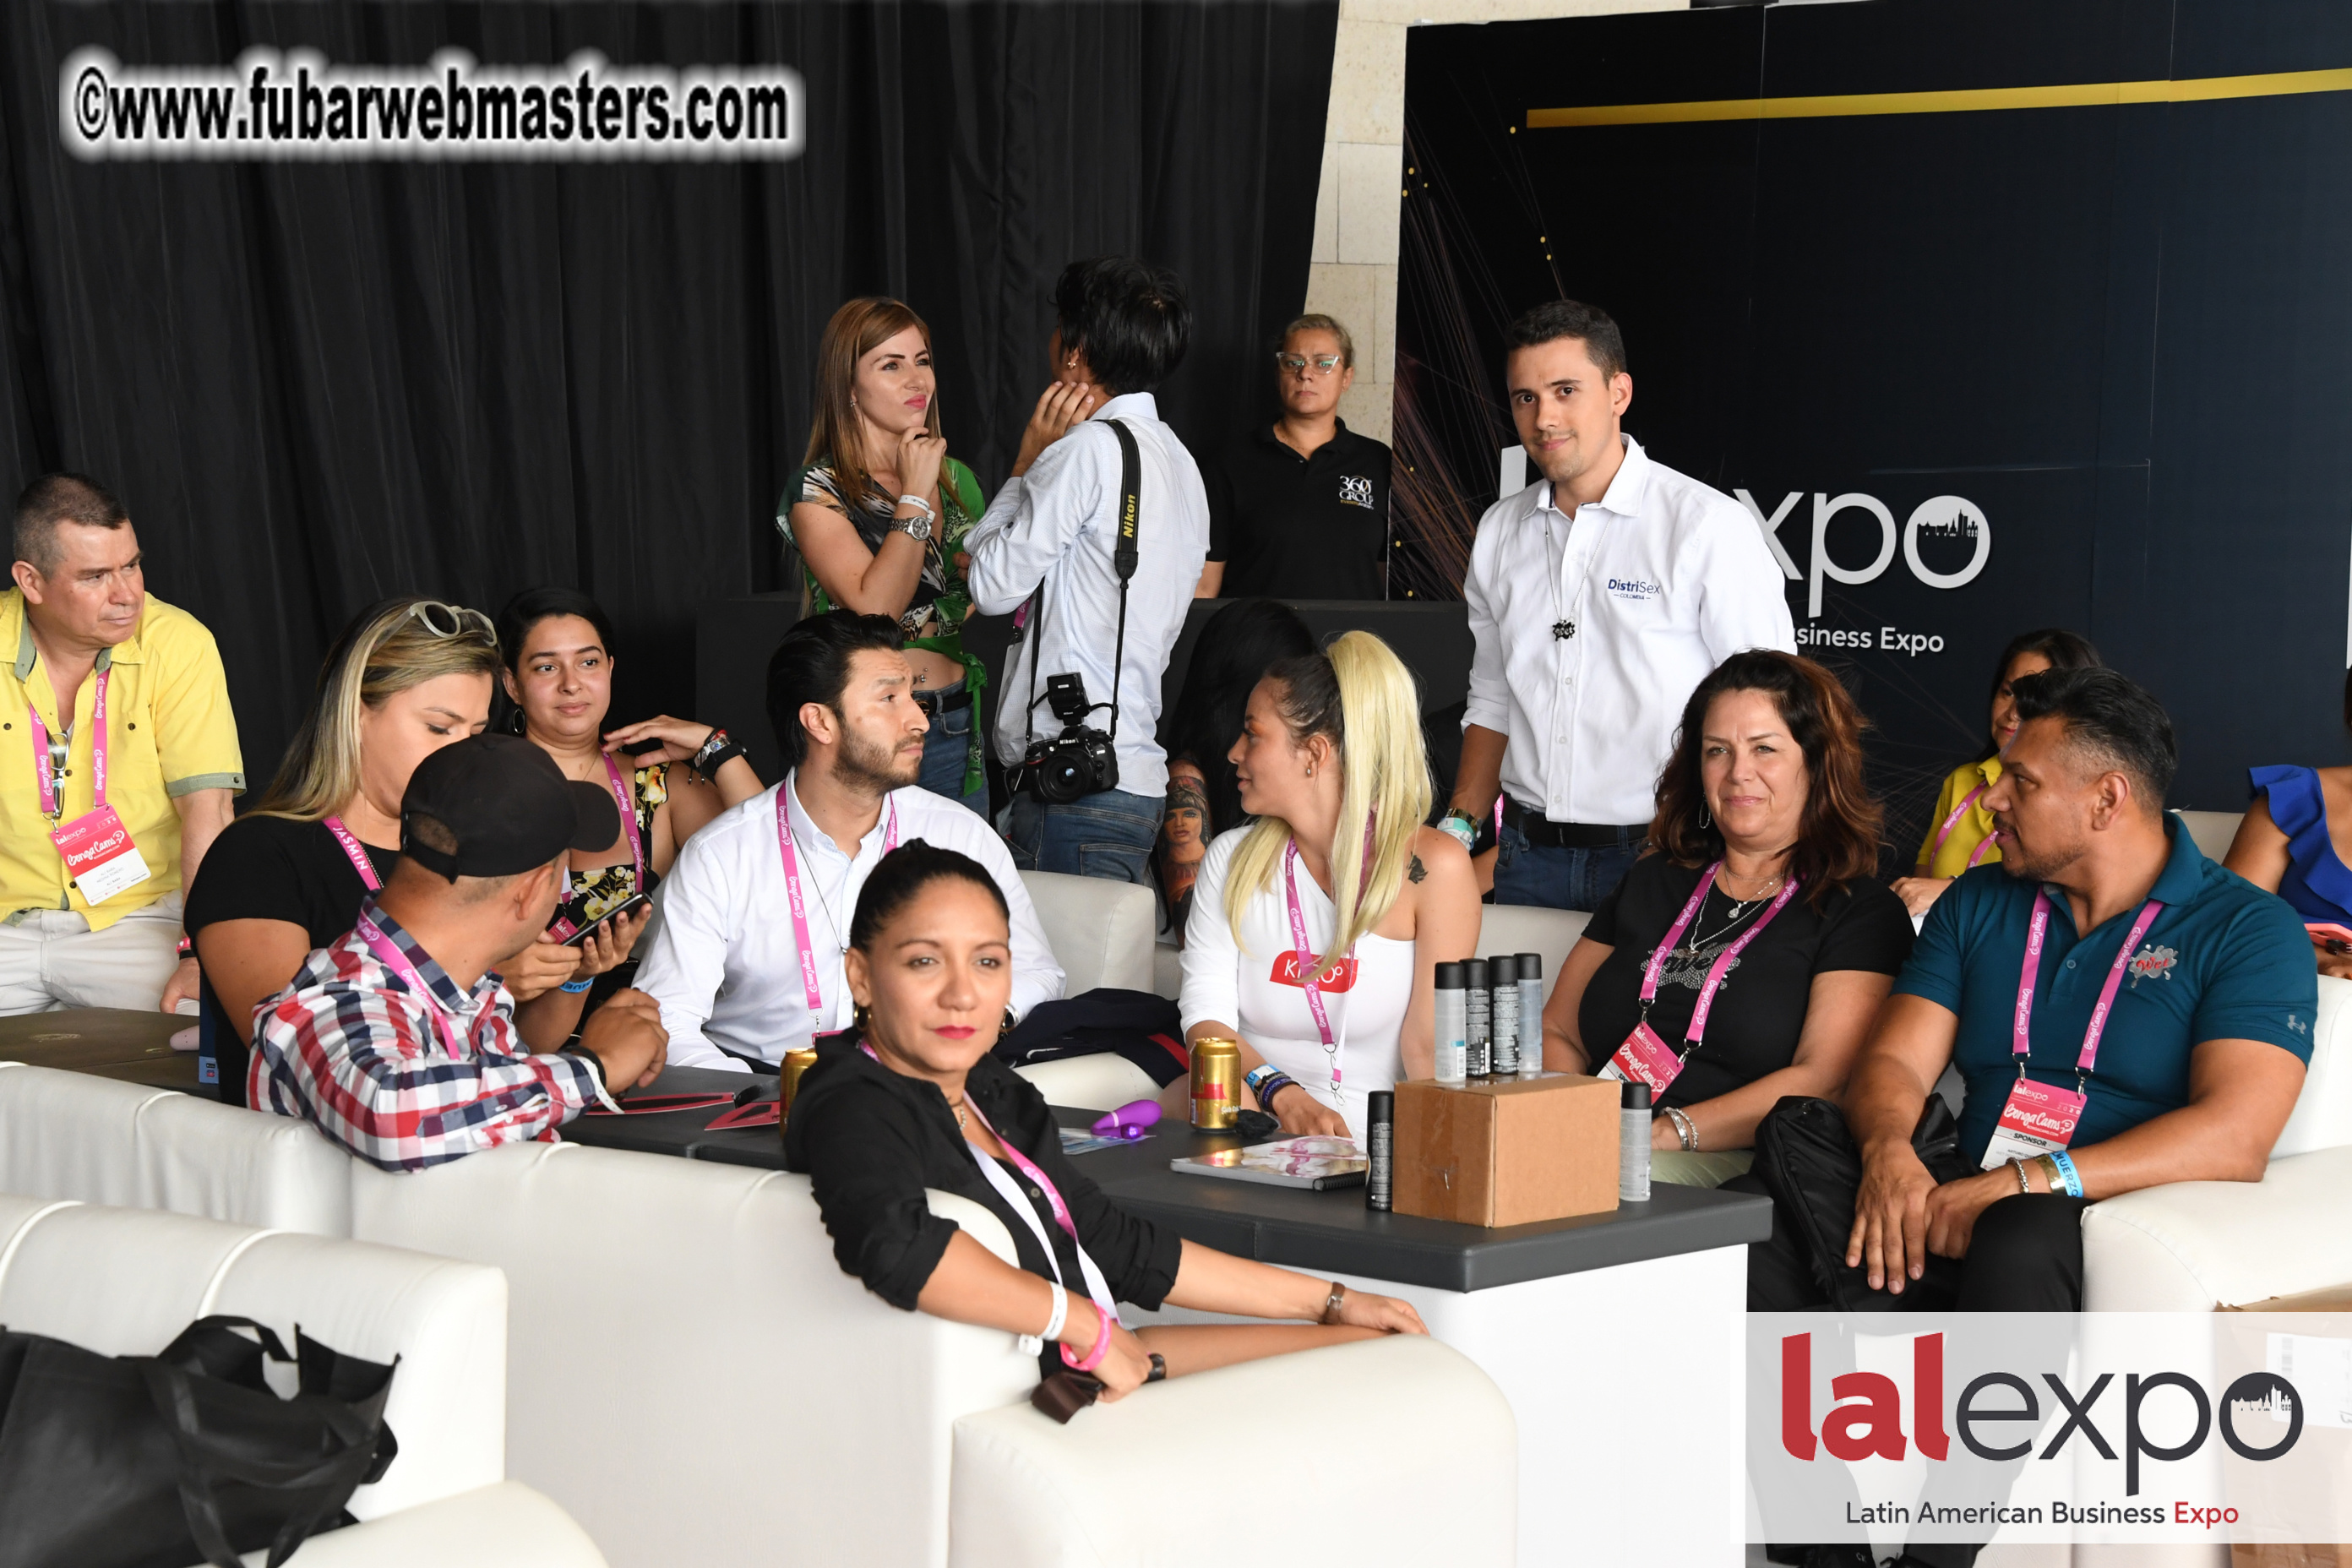 Adult novelty/toy industry Speed Networking and Meet-up